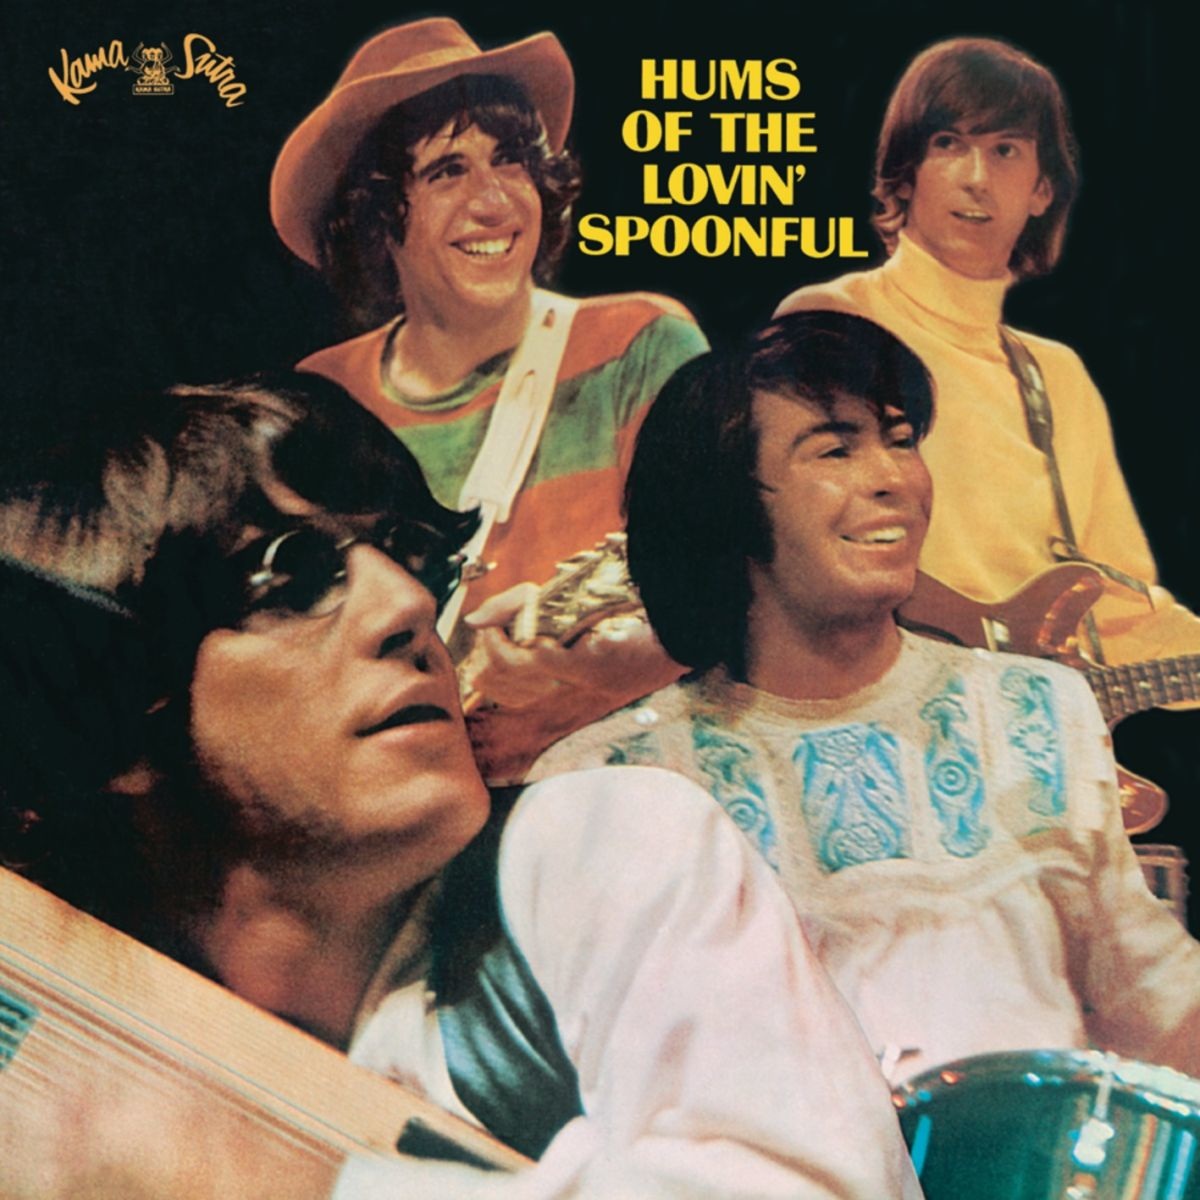 The Lovin' Spoonful - Collection ~ MUSIC THAT WE ADORE